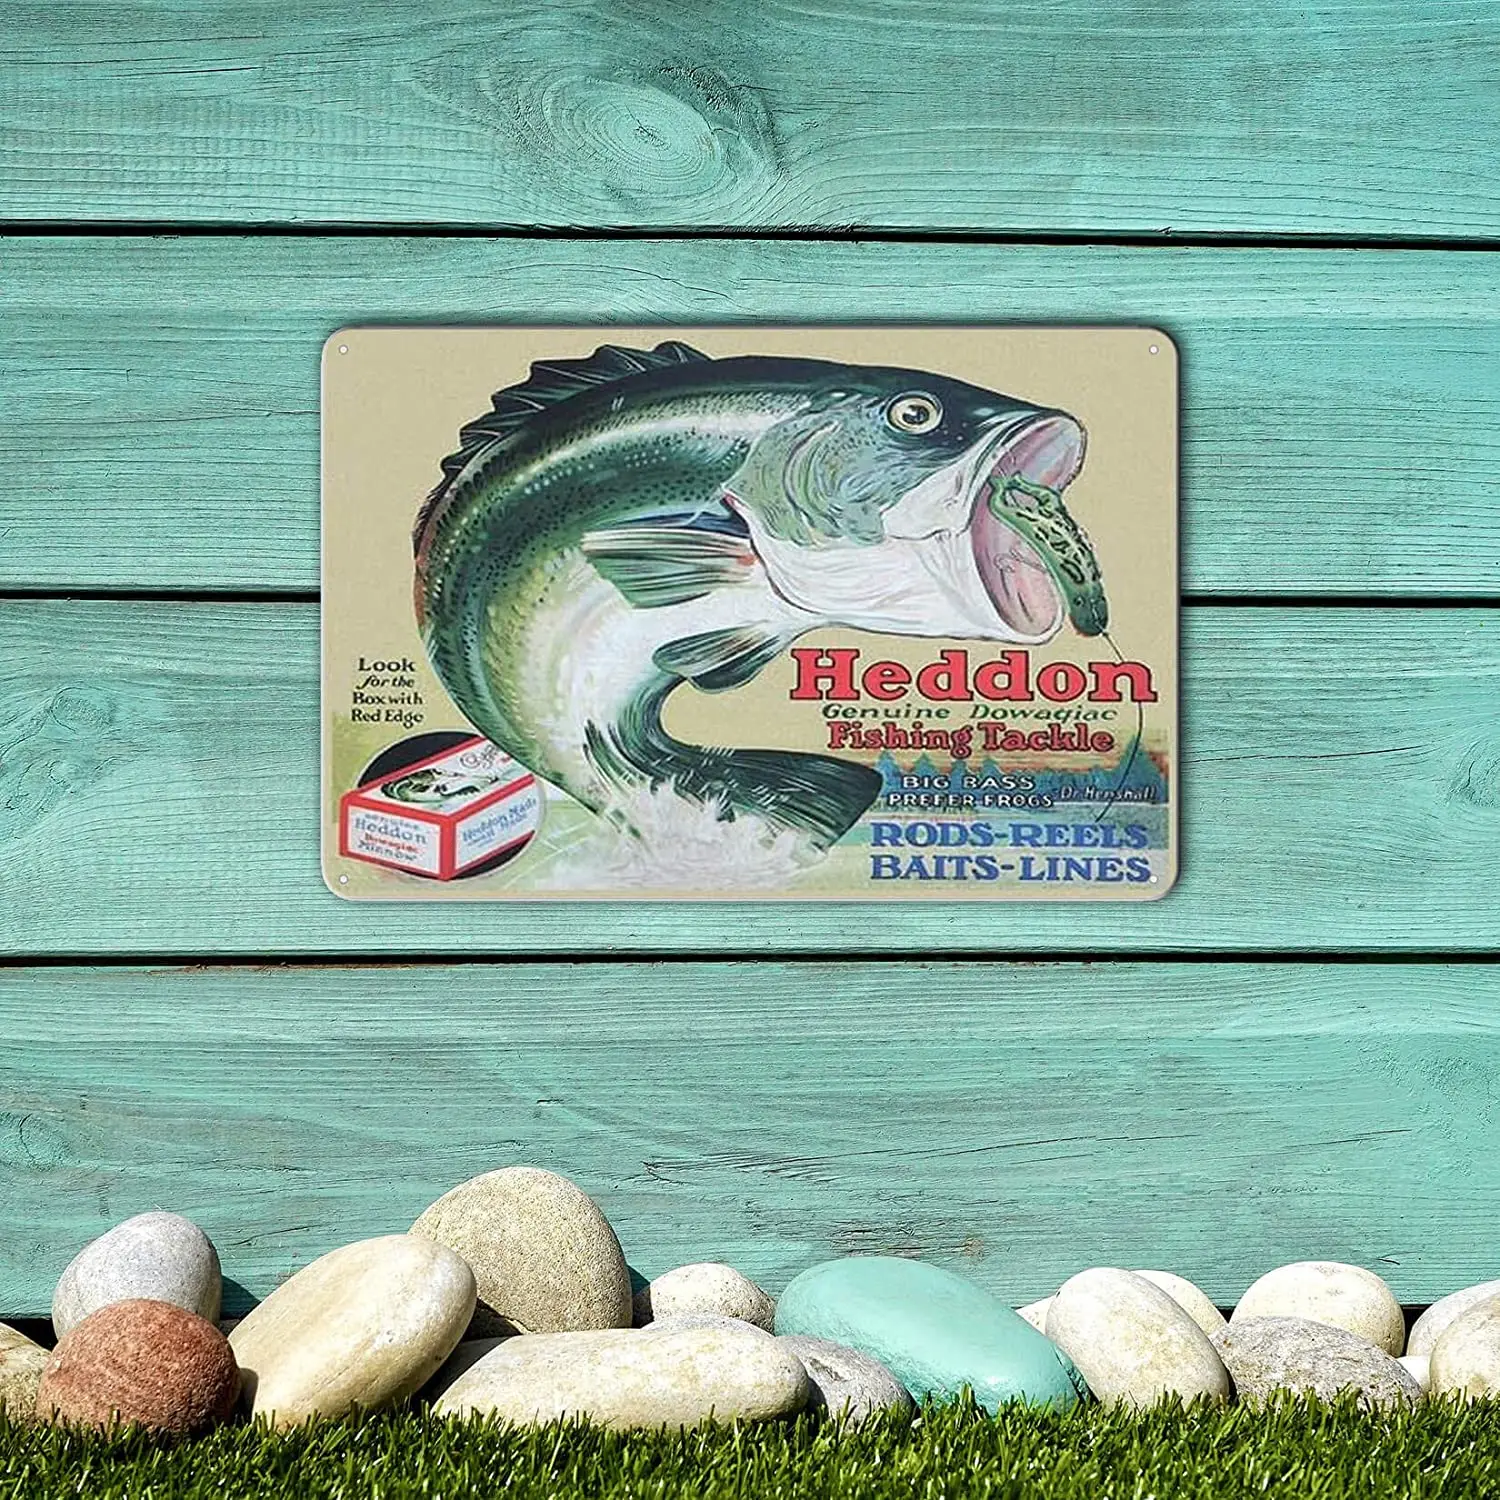 Agedsign Heddon Fishing Fish Lure Tackle Rod Reel Vintage Style Wall Decor  Metal Tin Sign 8 x 12 inches Farmhouse Decoration